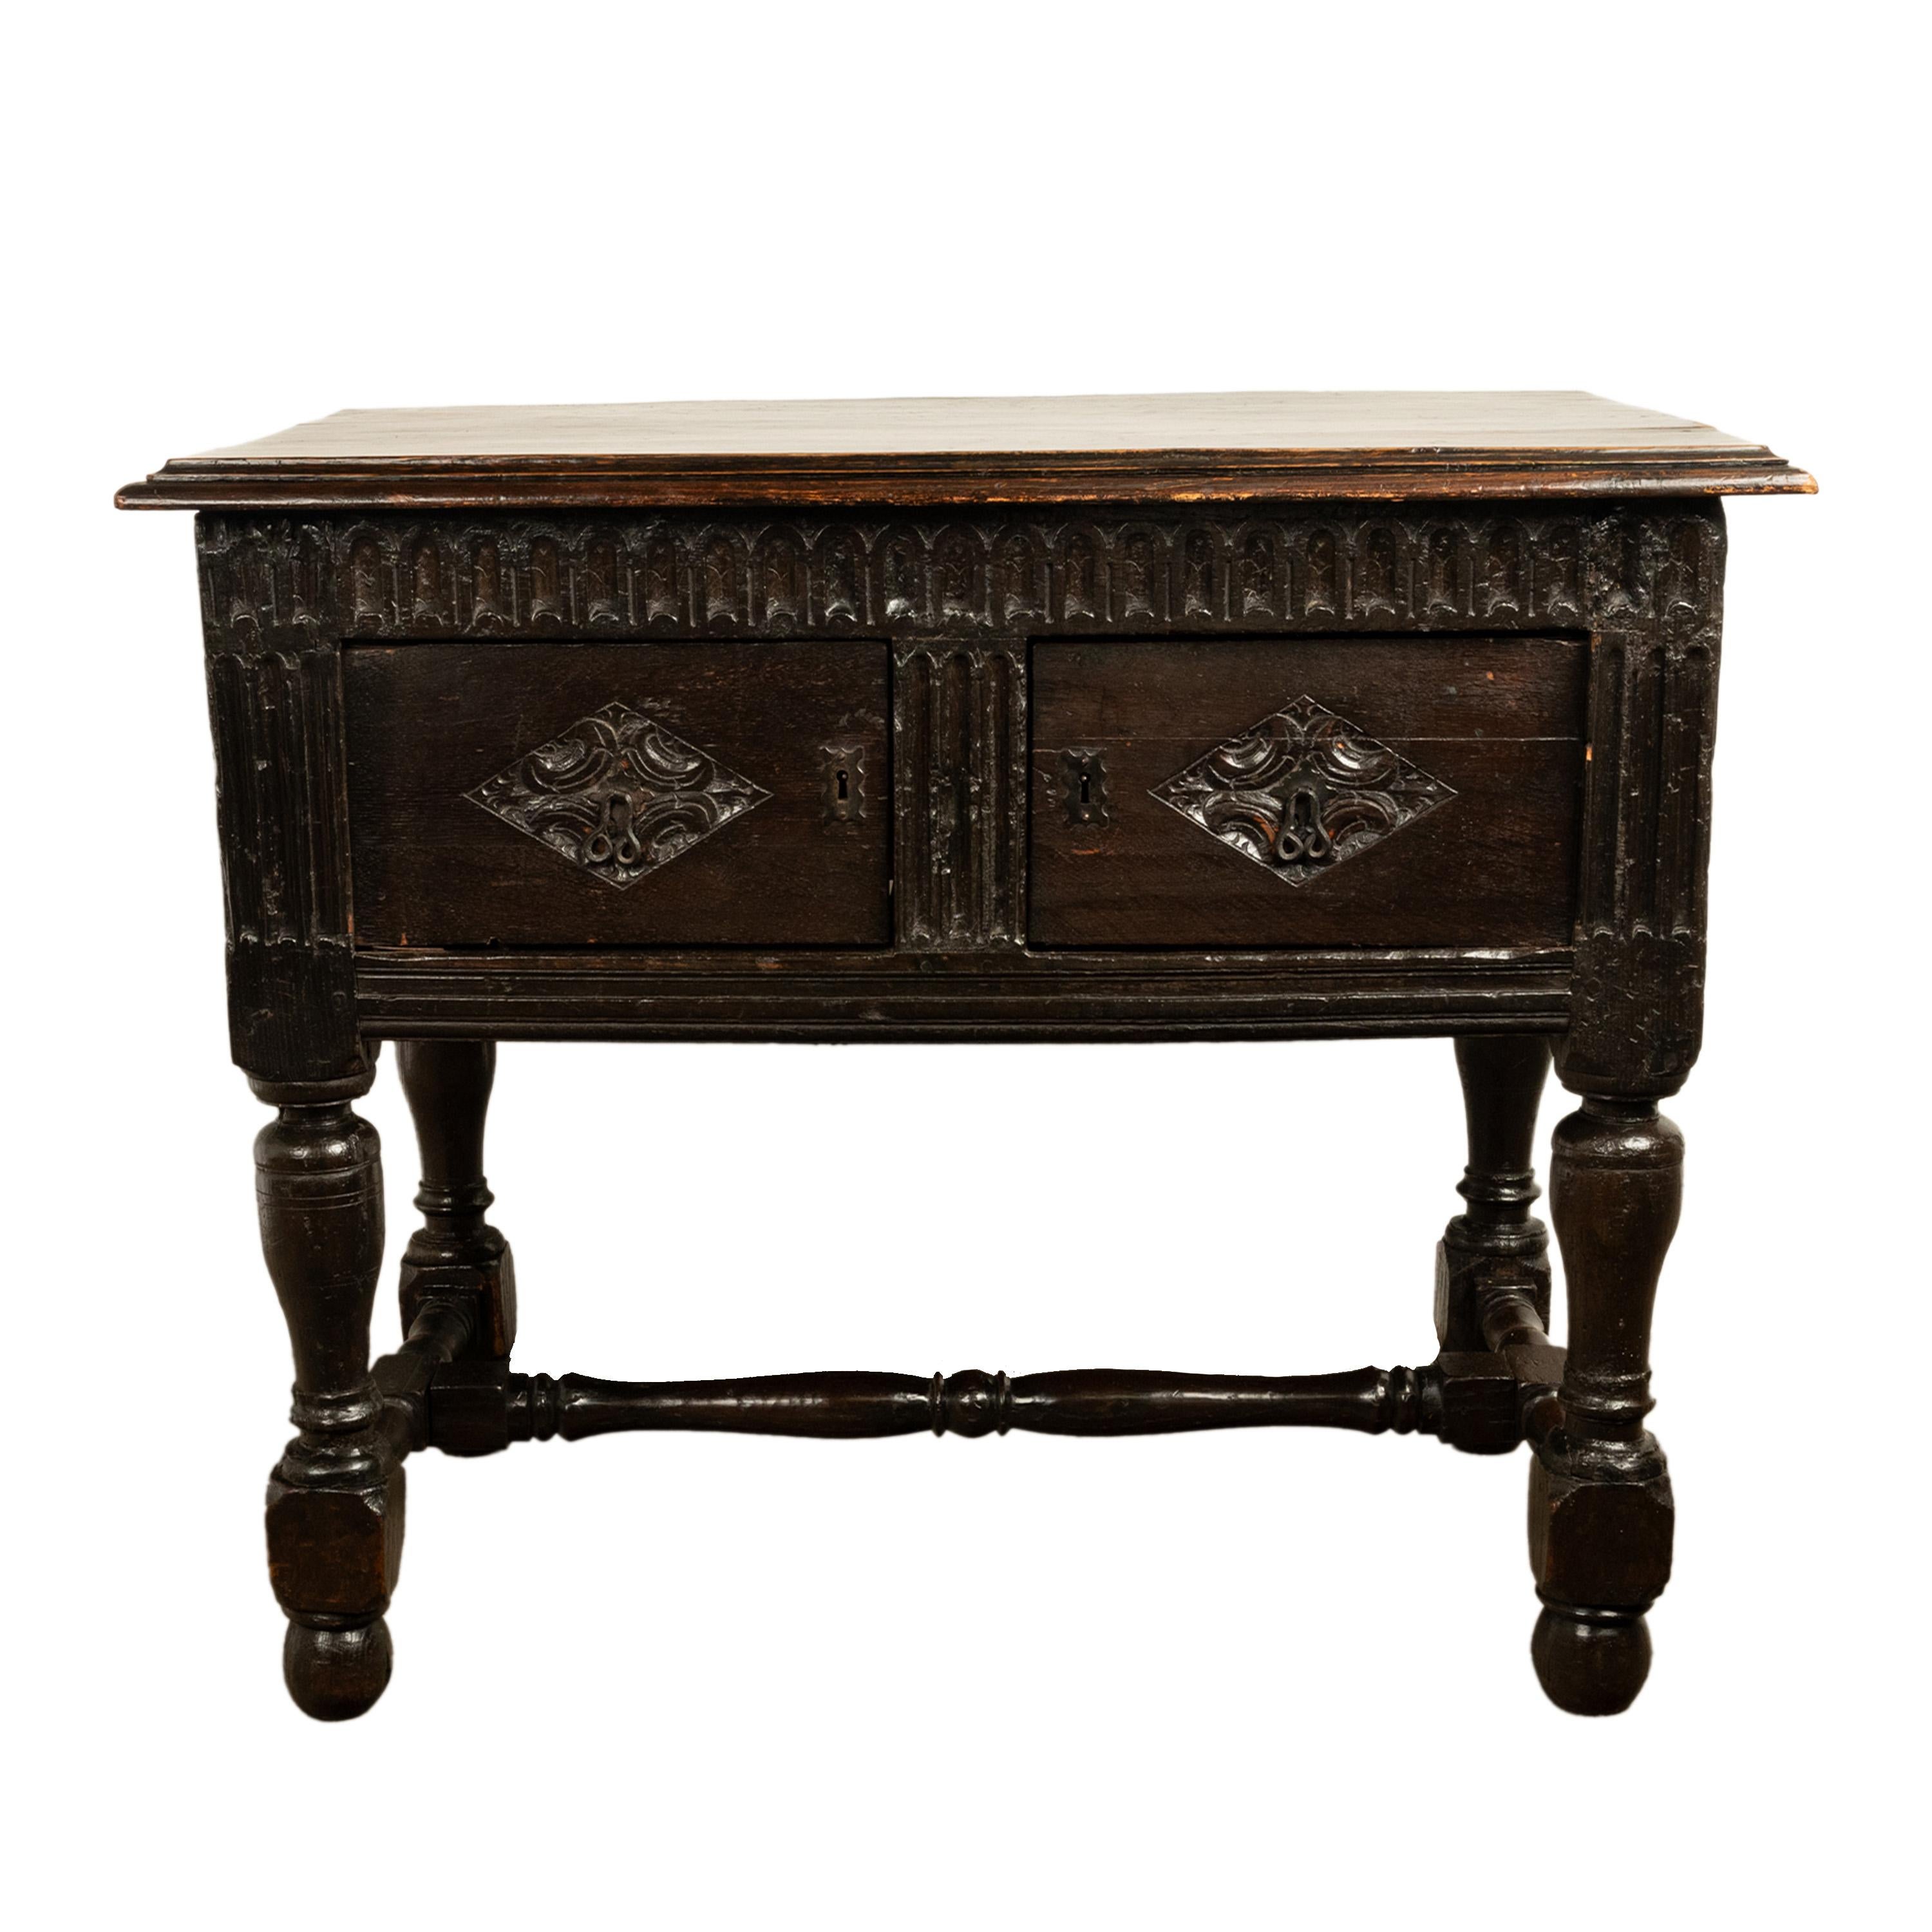 A rare antique King James I period carved oak side table, sideboard, cupboard, circa 1620.
This rare & diminutive Jacobean joined sideboard/table having a carved arcaded gallery on the front and to each side, below is a pair of cupboard doors with